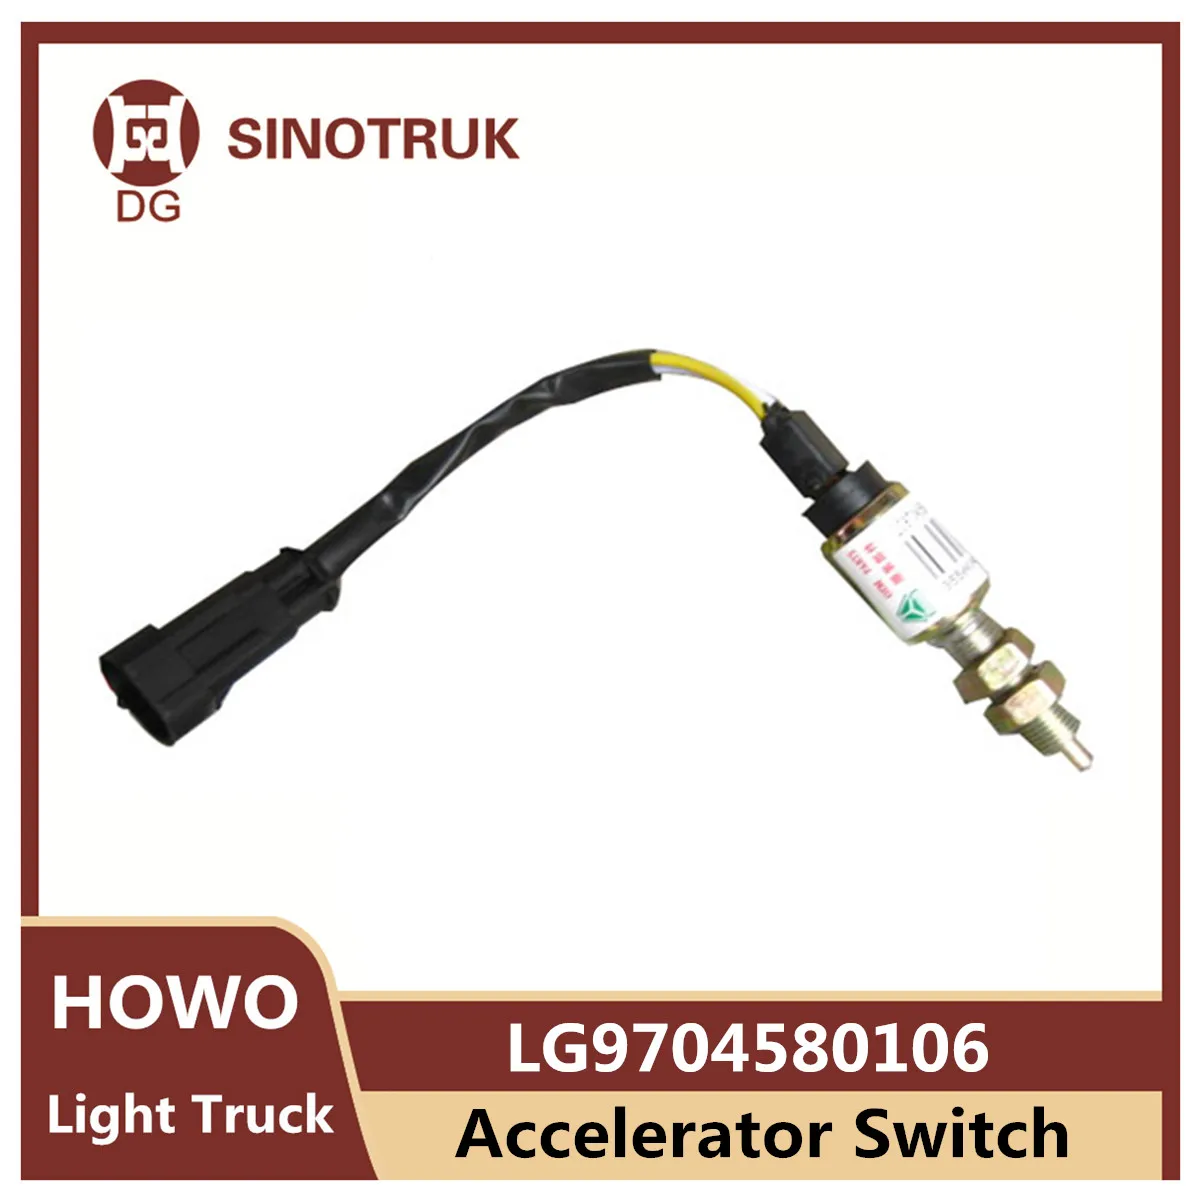 Accelerator Switch LG9704580106 for Sinotruk Howo Light Truck Clutch Switch Original Auto Truck Parts ecas remote control wg9925585110 for sinotruk howo t7h rear airbag height control switch original truck parts